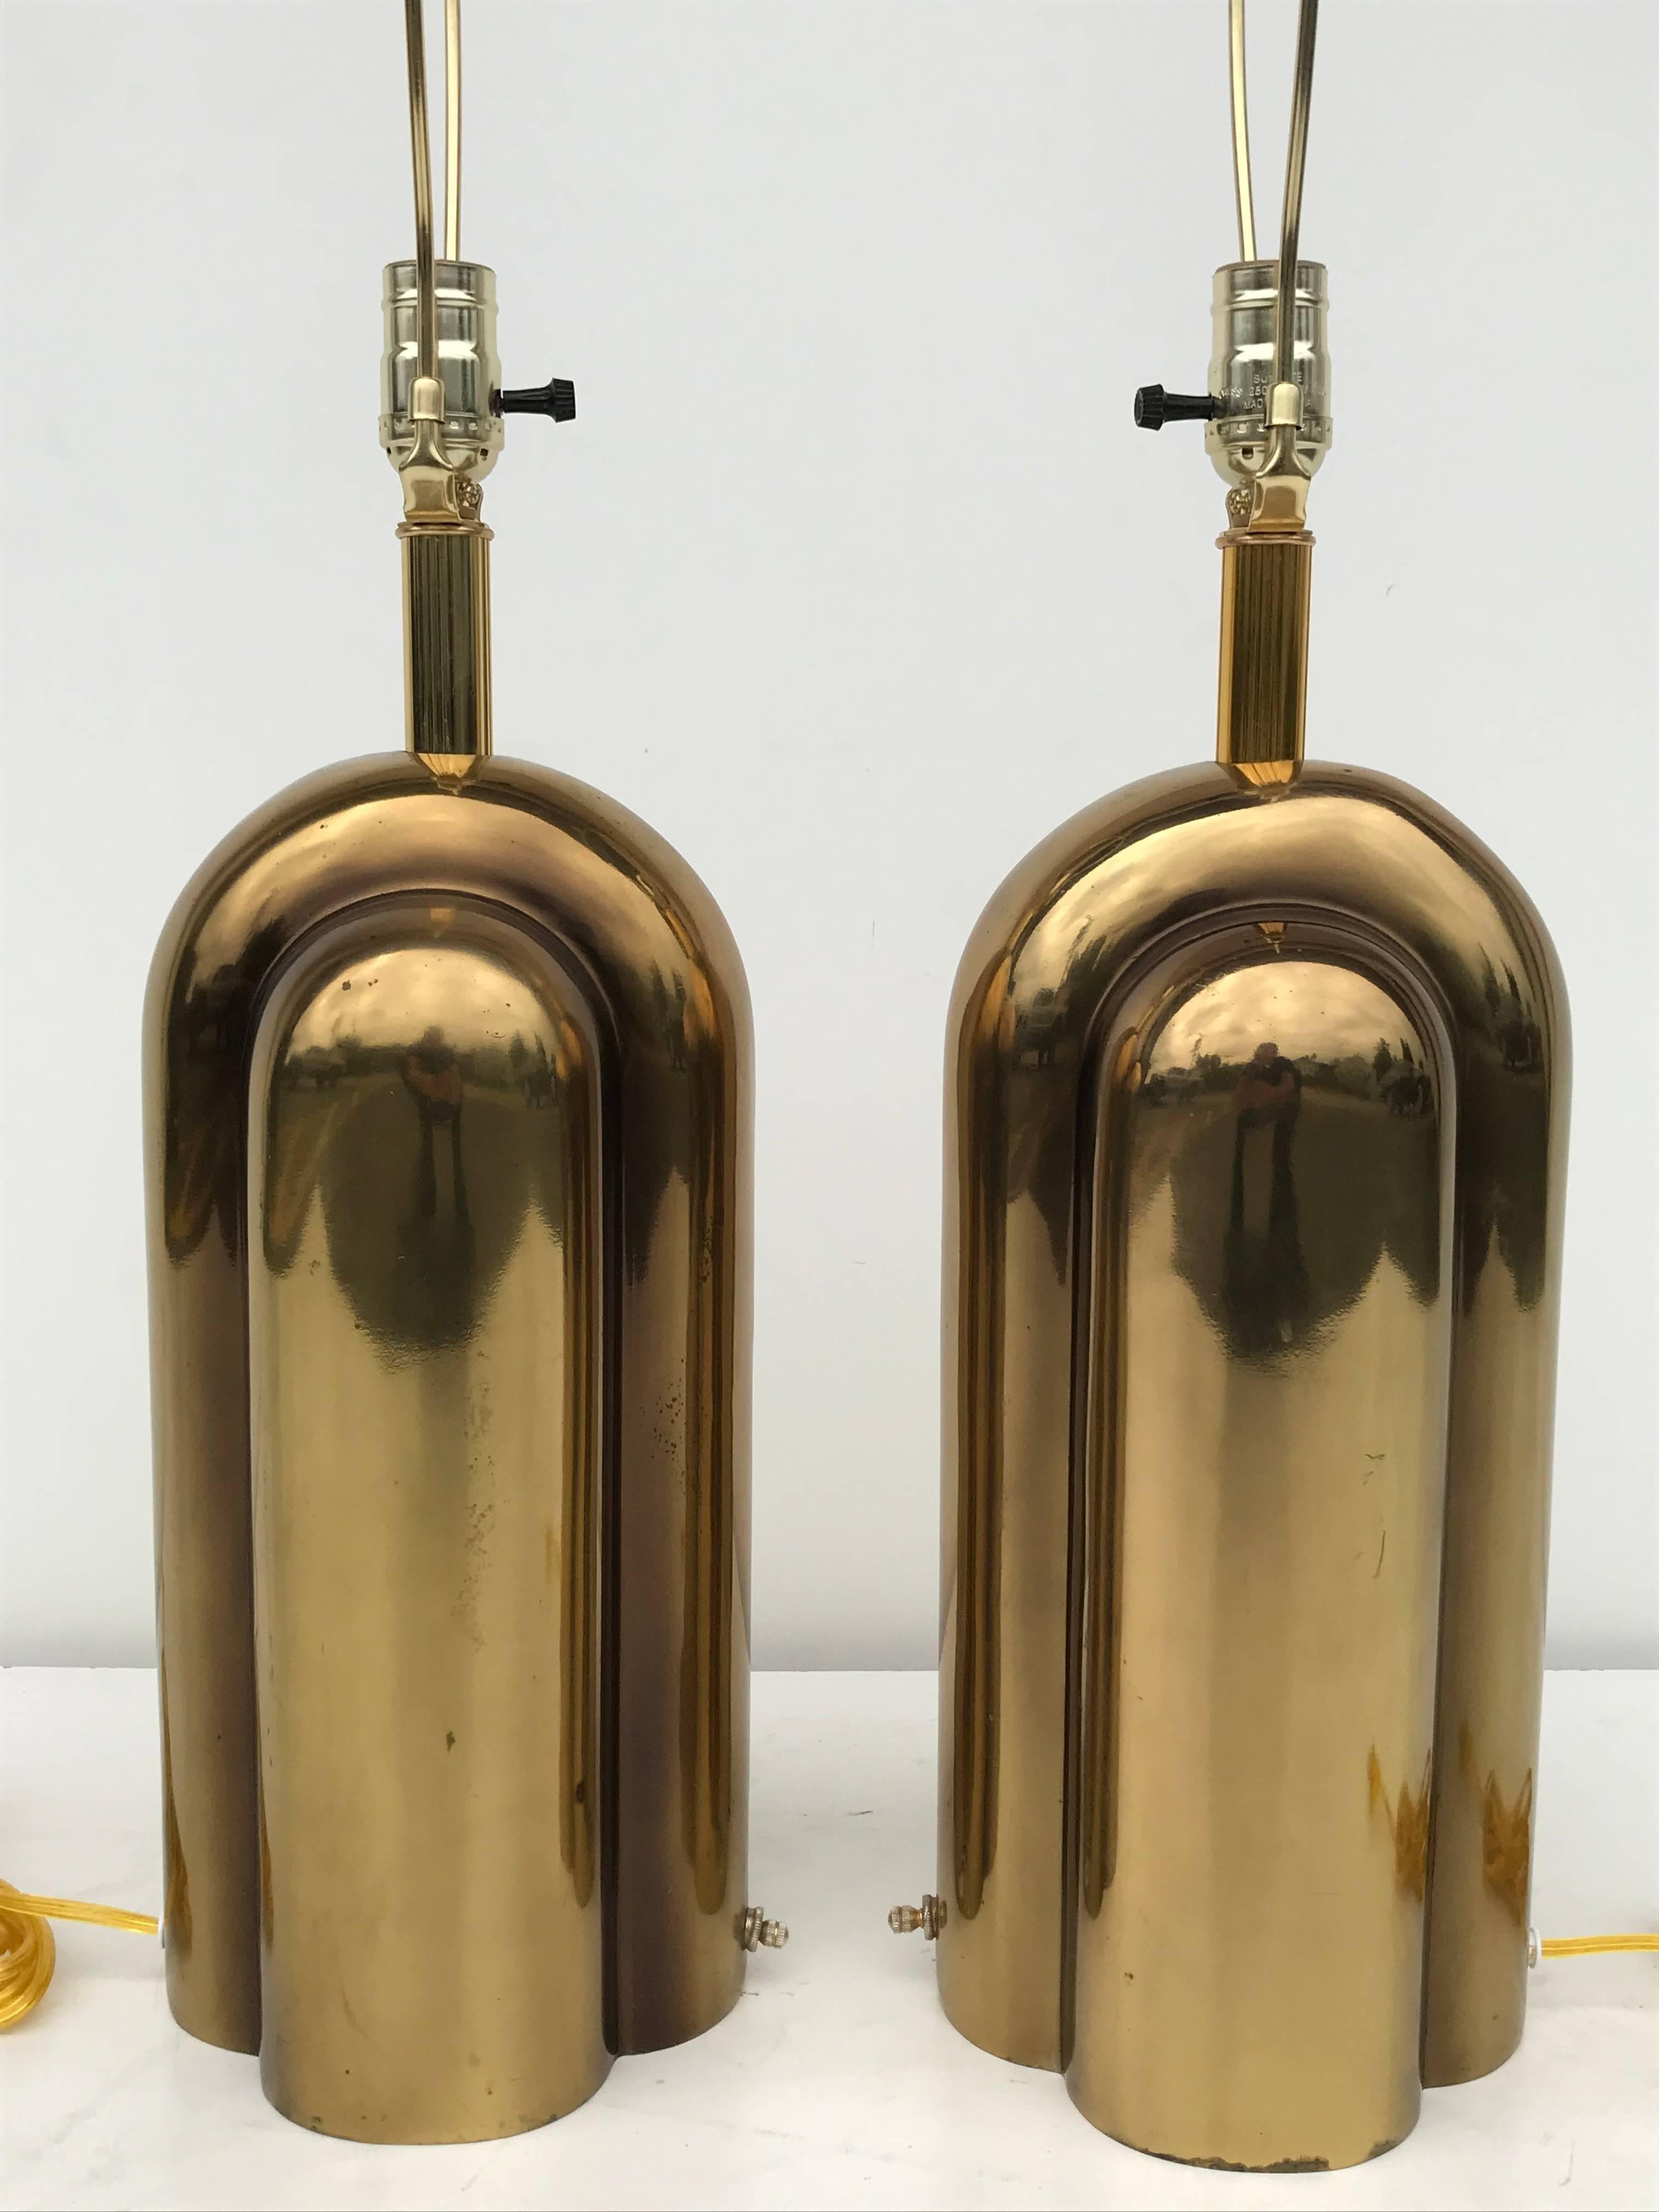 Pair of Art Deco style brass lamps by Westwood Lighting.